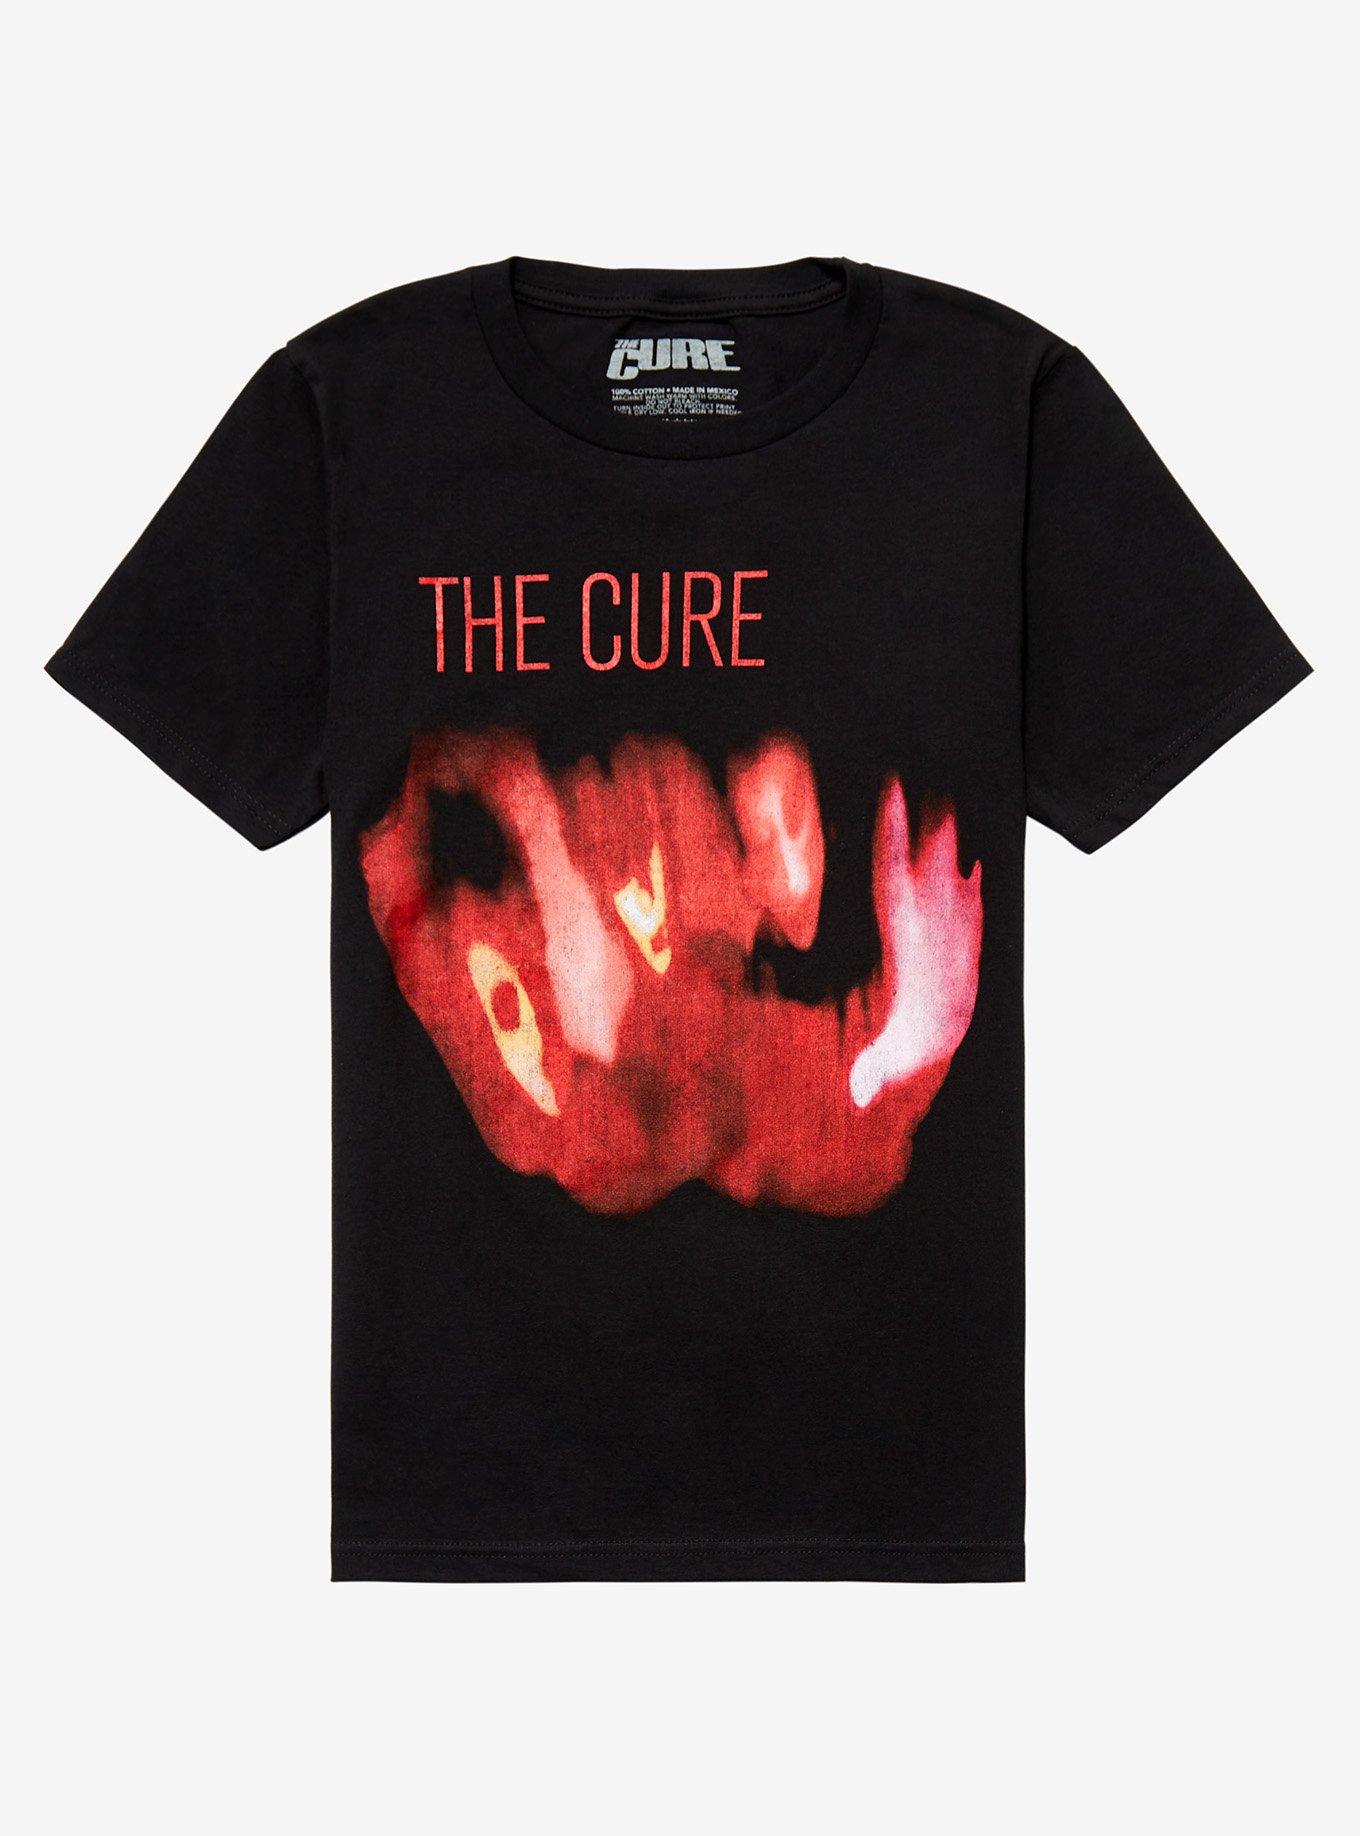 The Cure Pornography OFFICIAL Licensed T-Shirt